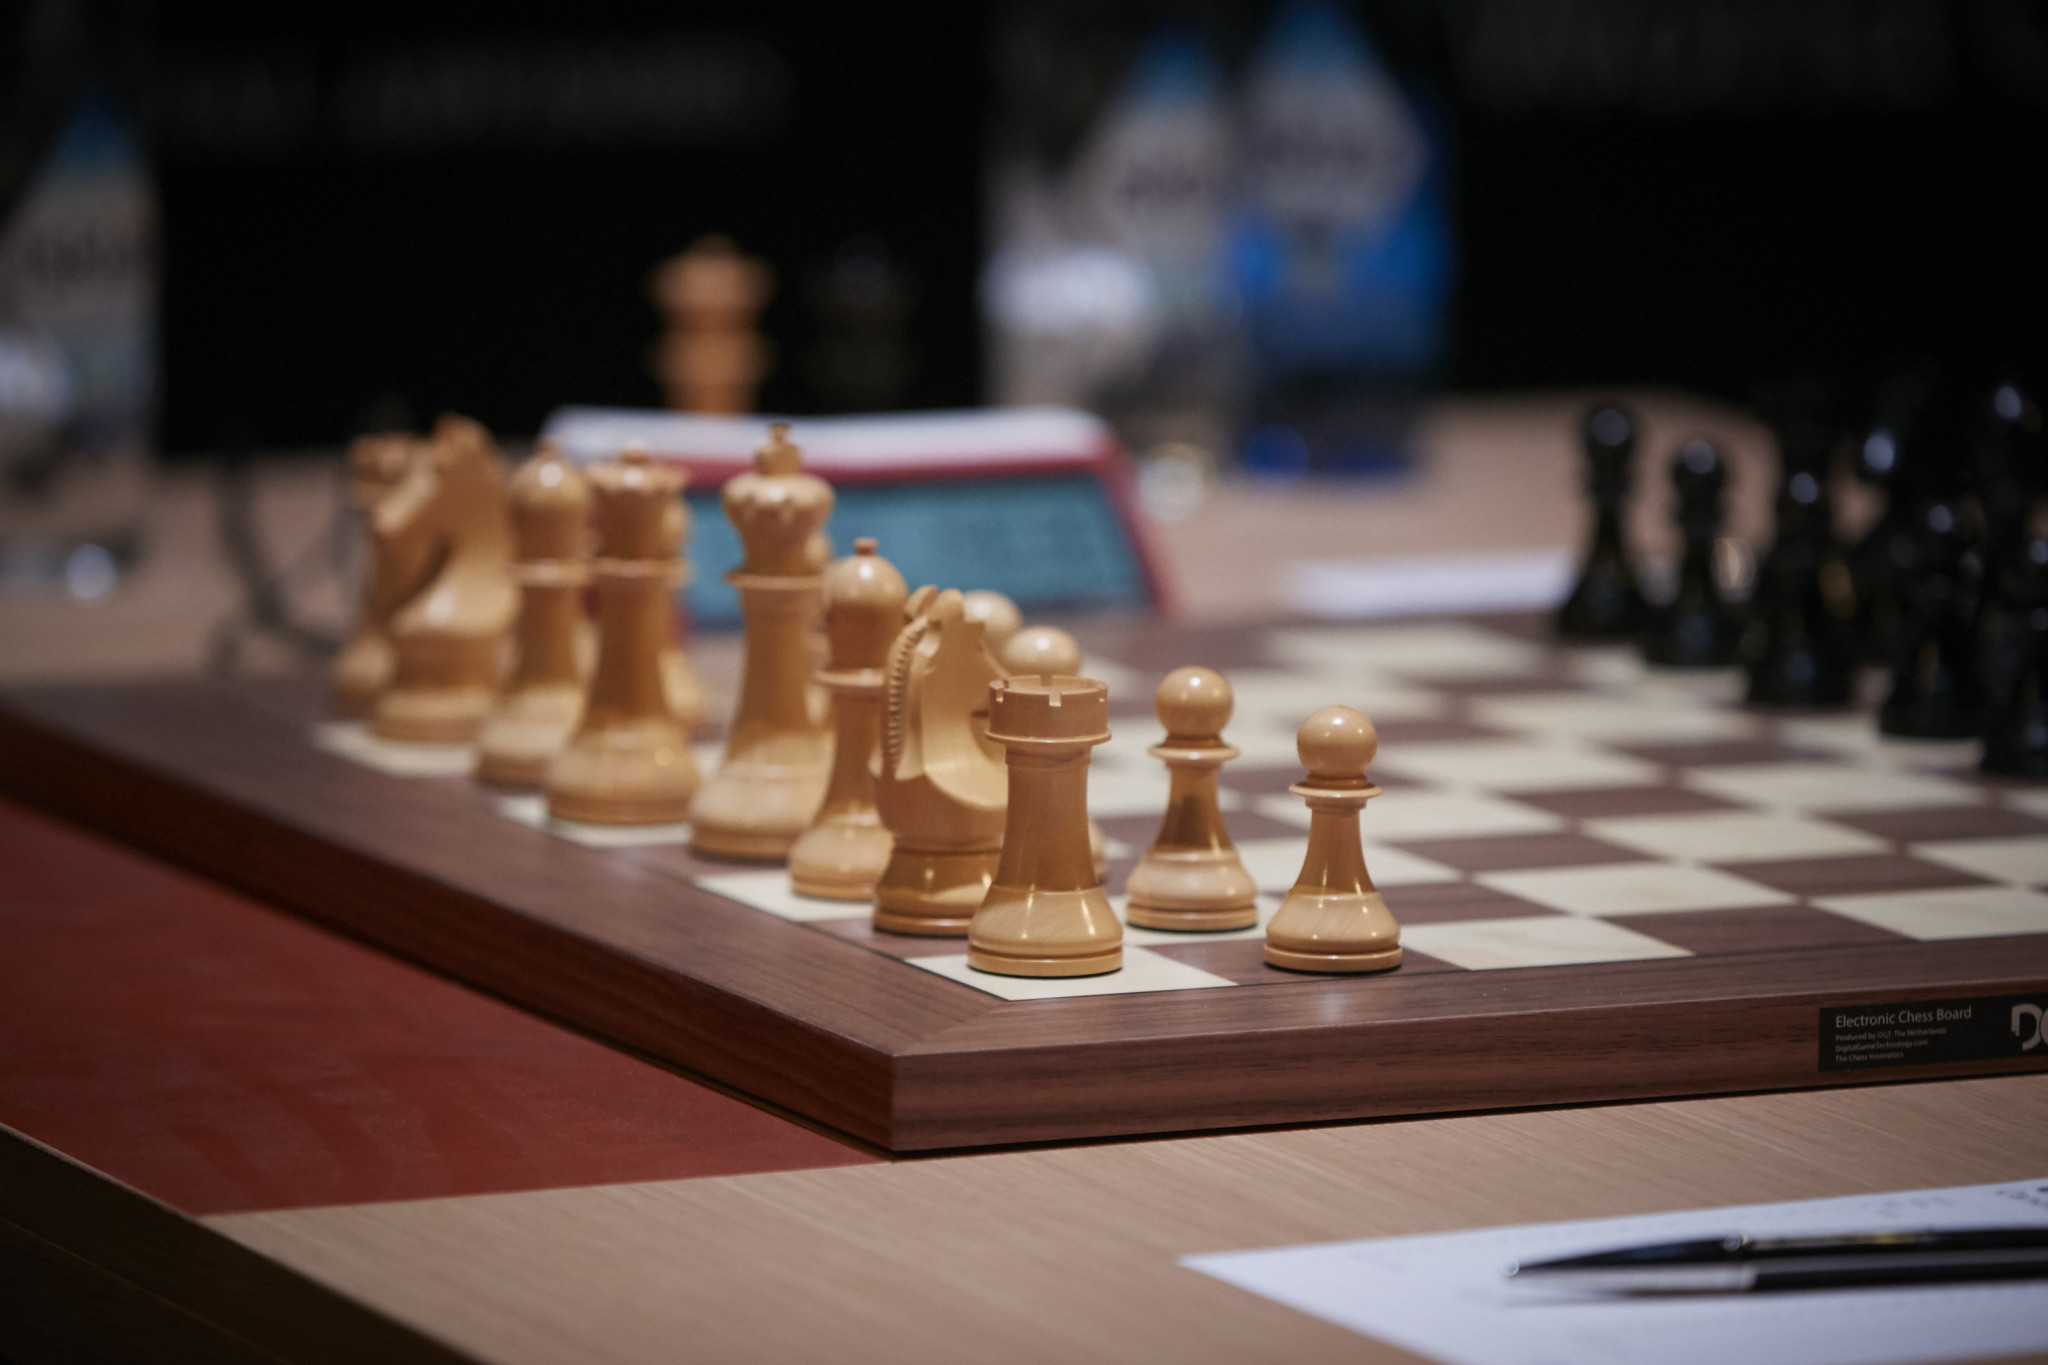 Russian and Belarusians' ability to compete as neutrals extended until 2024 by FIDE